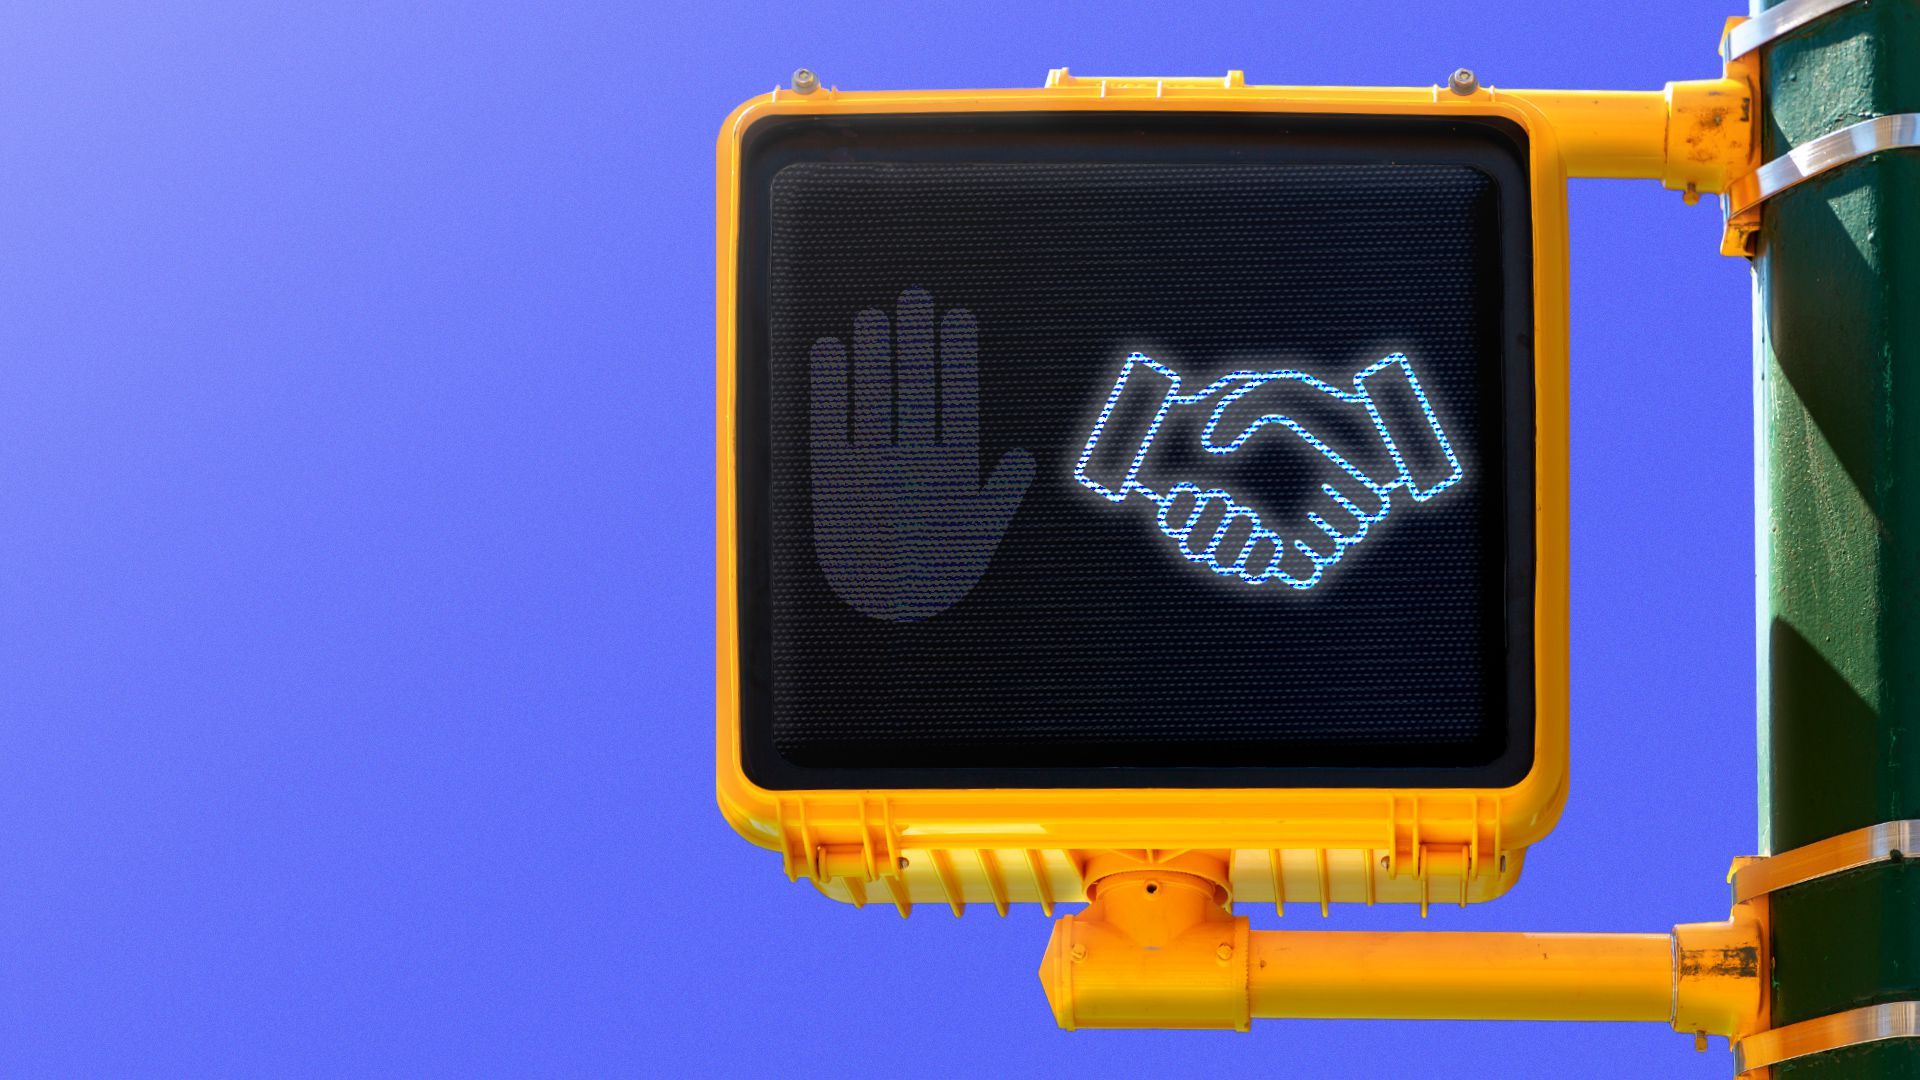 Illustration of a pedestrian crosswalk sign showing a dull icon of a hand indicating "stop" and a lit up and glowing icon of a handshake.